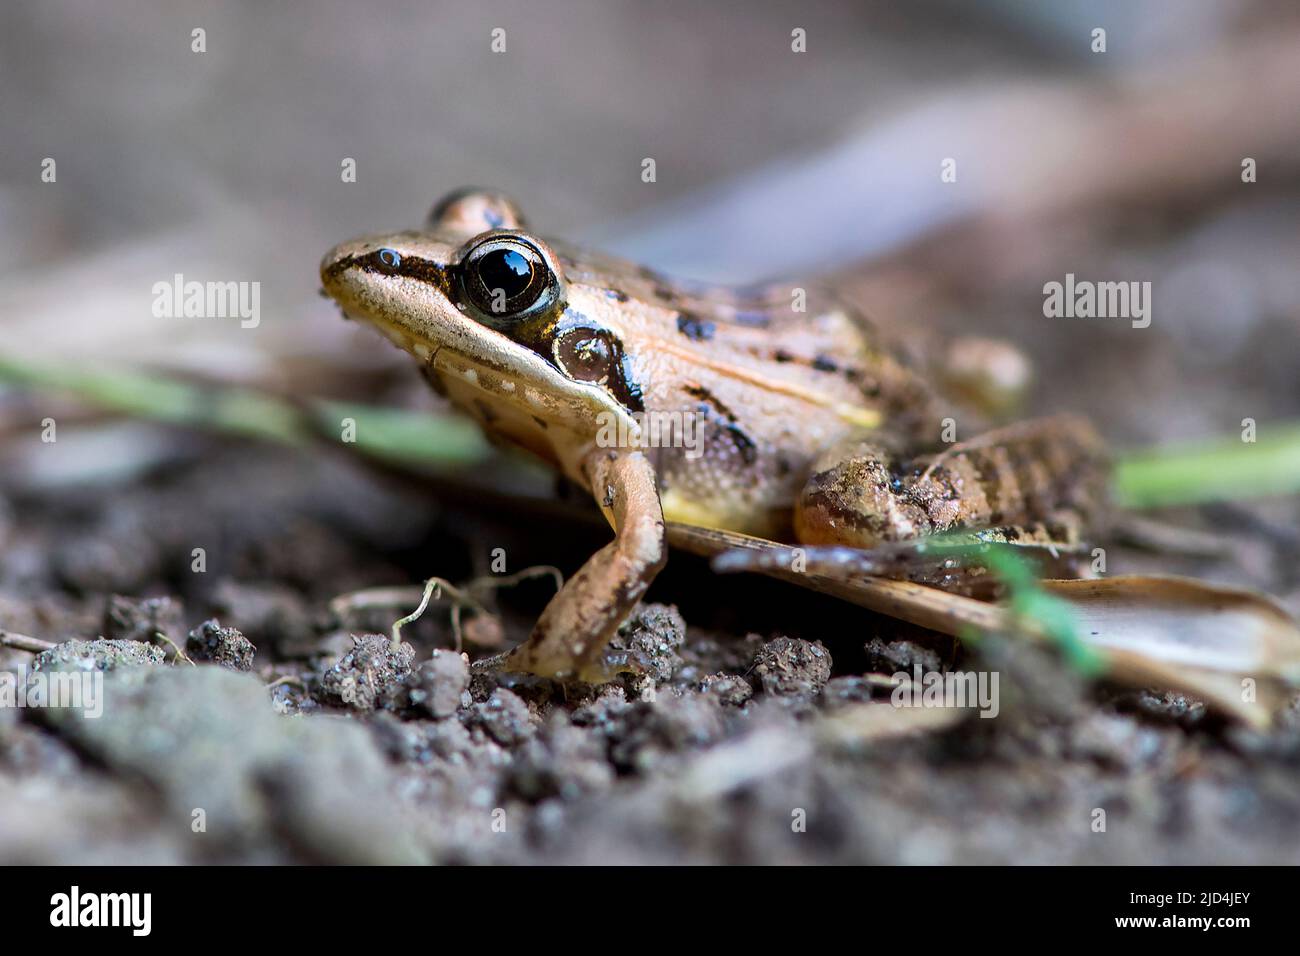 Small frog, probably from the genus Gephyromantis, from Nahampoana Private Reserve, Madagascar. Stock Photo